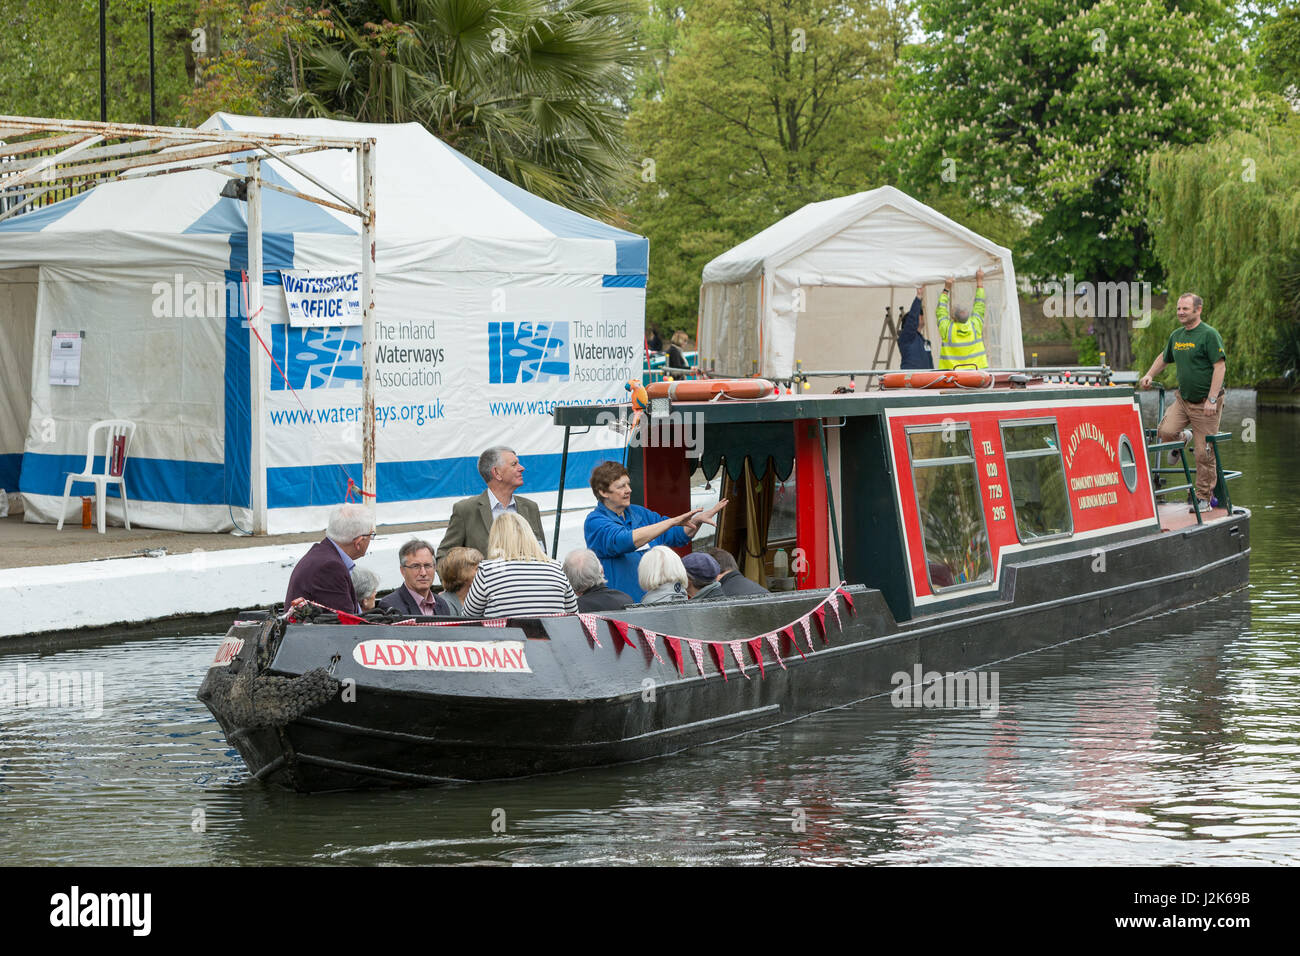 Little Venice, London, UK. 29 April 2017. Inland Waterways Association Canalway Cavalcade returns to the Pool of Little Venice near Paddington, London over the May Bank Holiday weekend. This is the biggest event in the nation’s waterways calendar with a large number of colourful boats dressed for the occasion. Neil Cordell/Alamy Live News Stock Photo